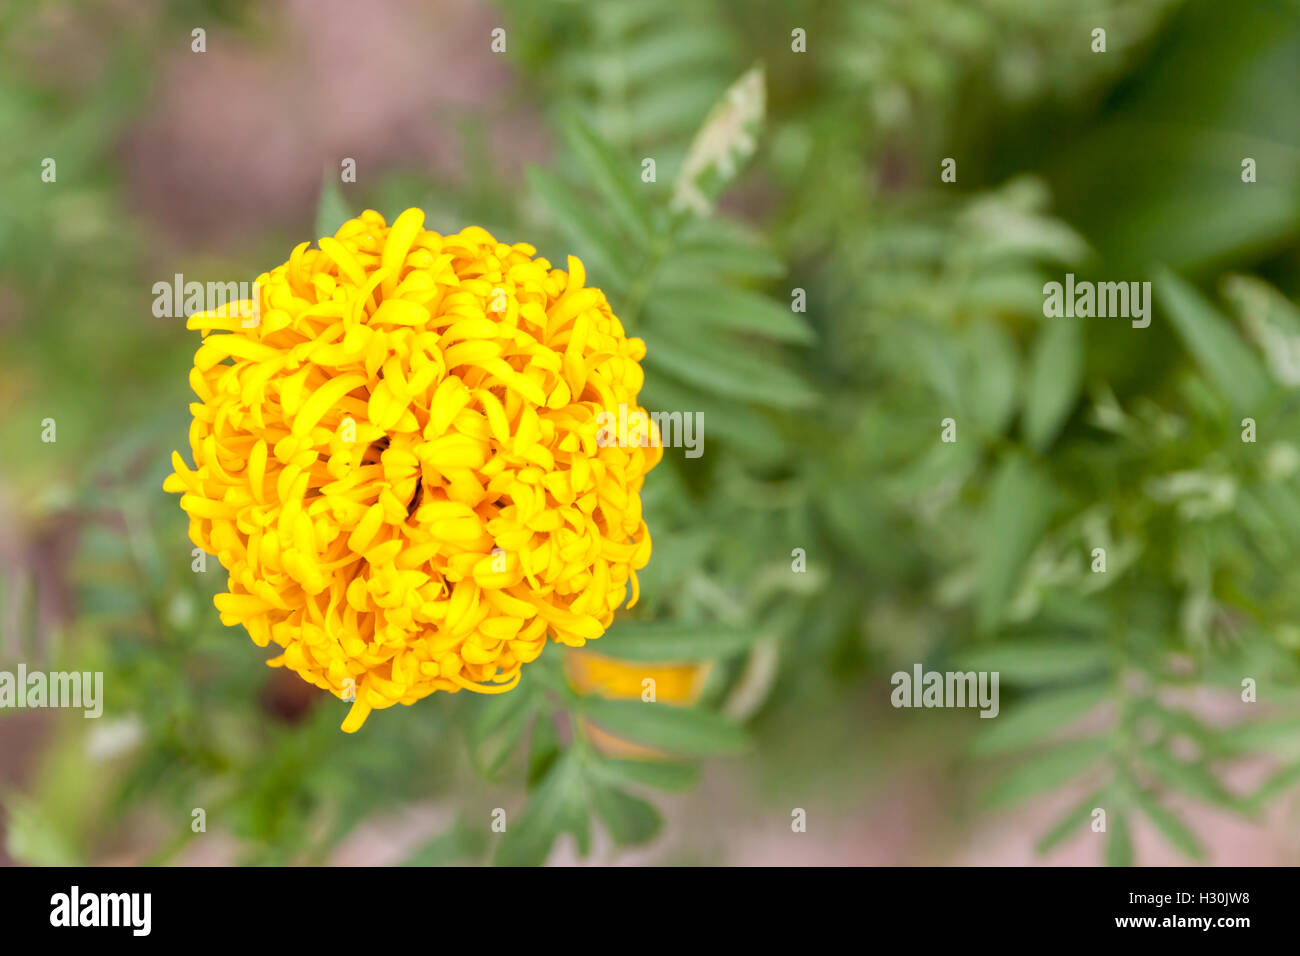 Yellow Marigolds flower in garden. Flower with colorful beauty. Stock Photo